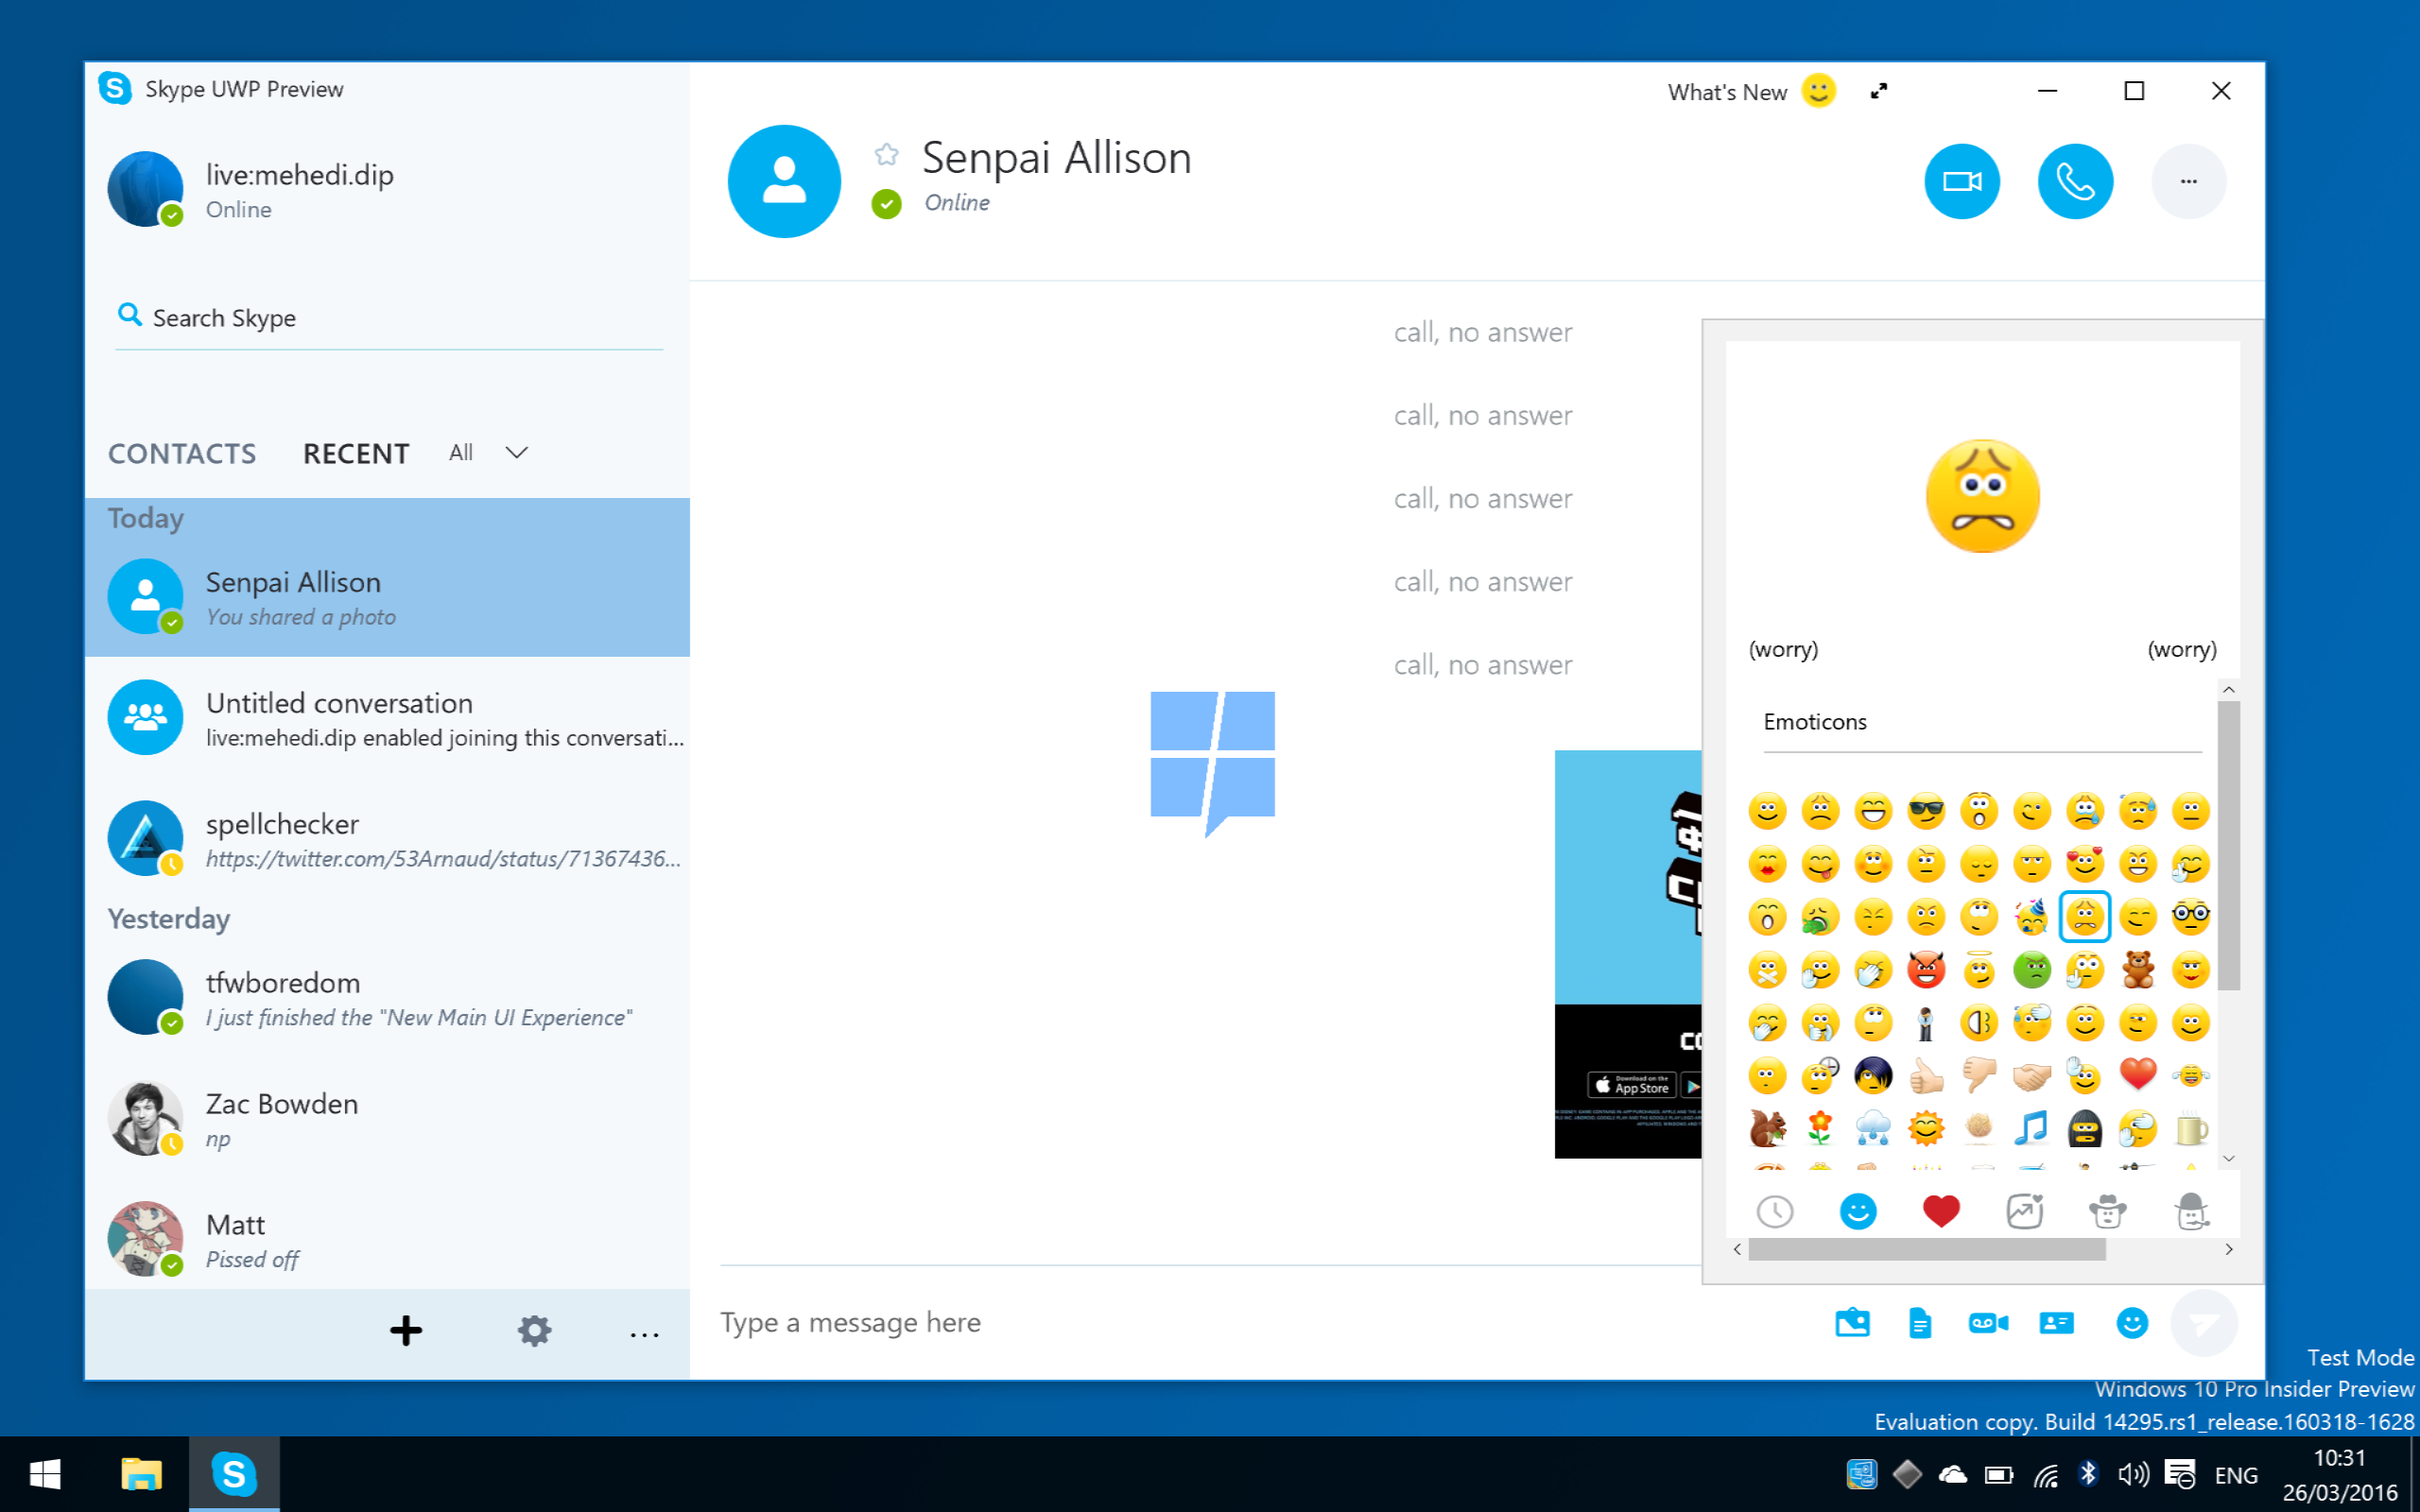 download the last version for windows Skype 8.98.0.407